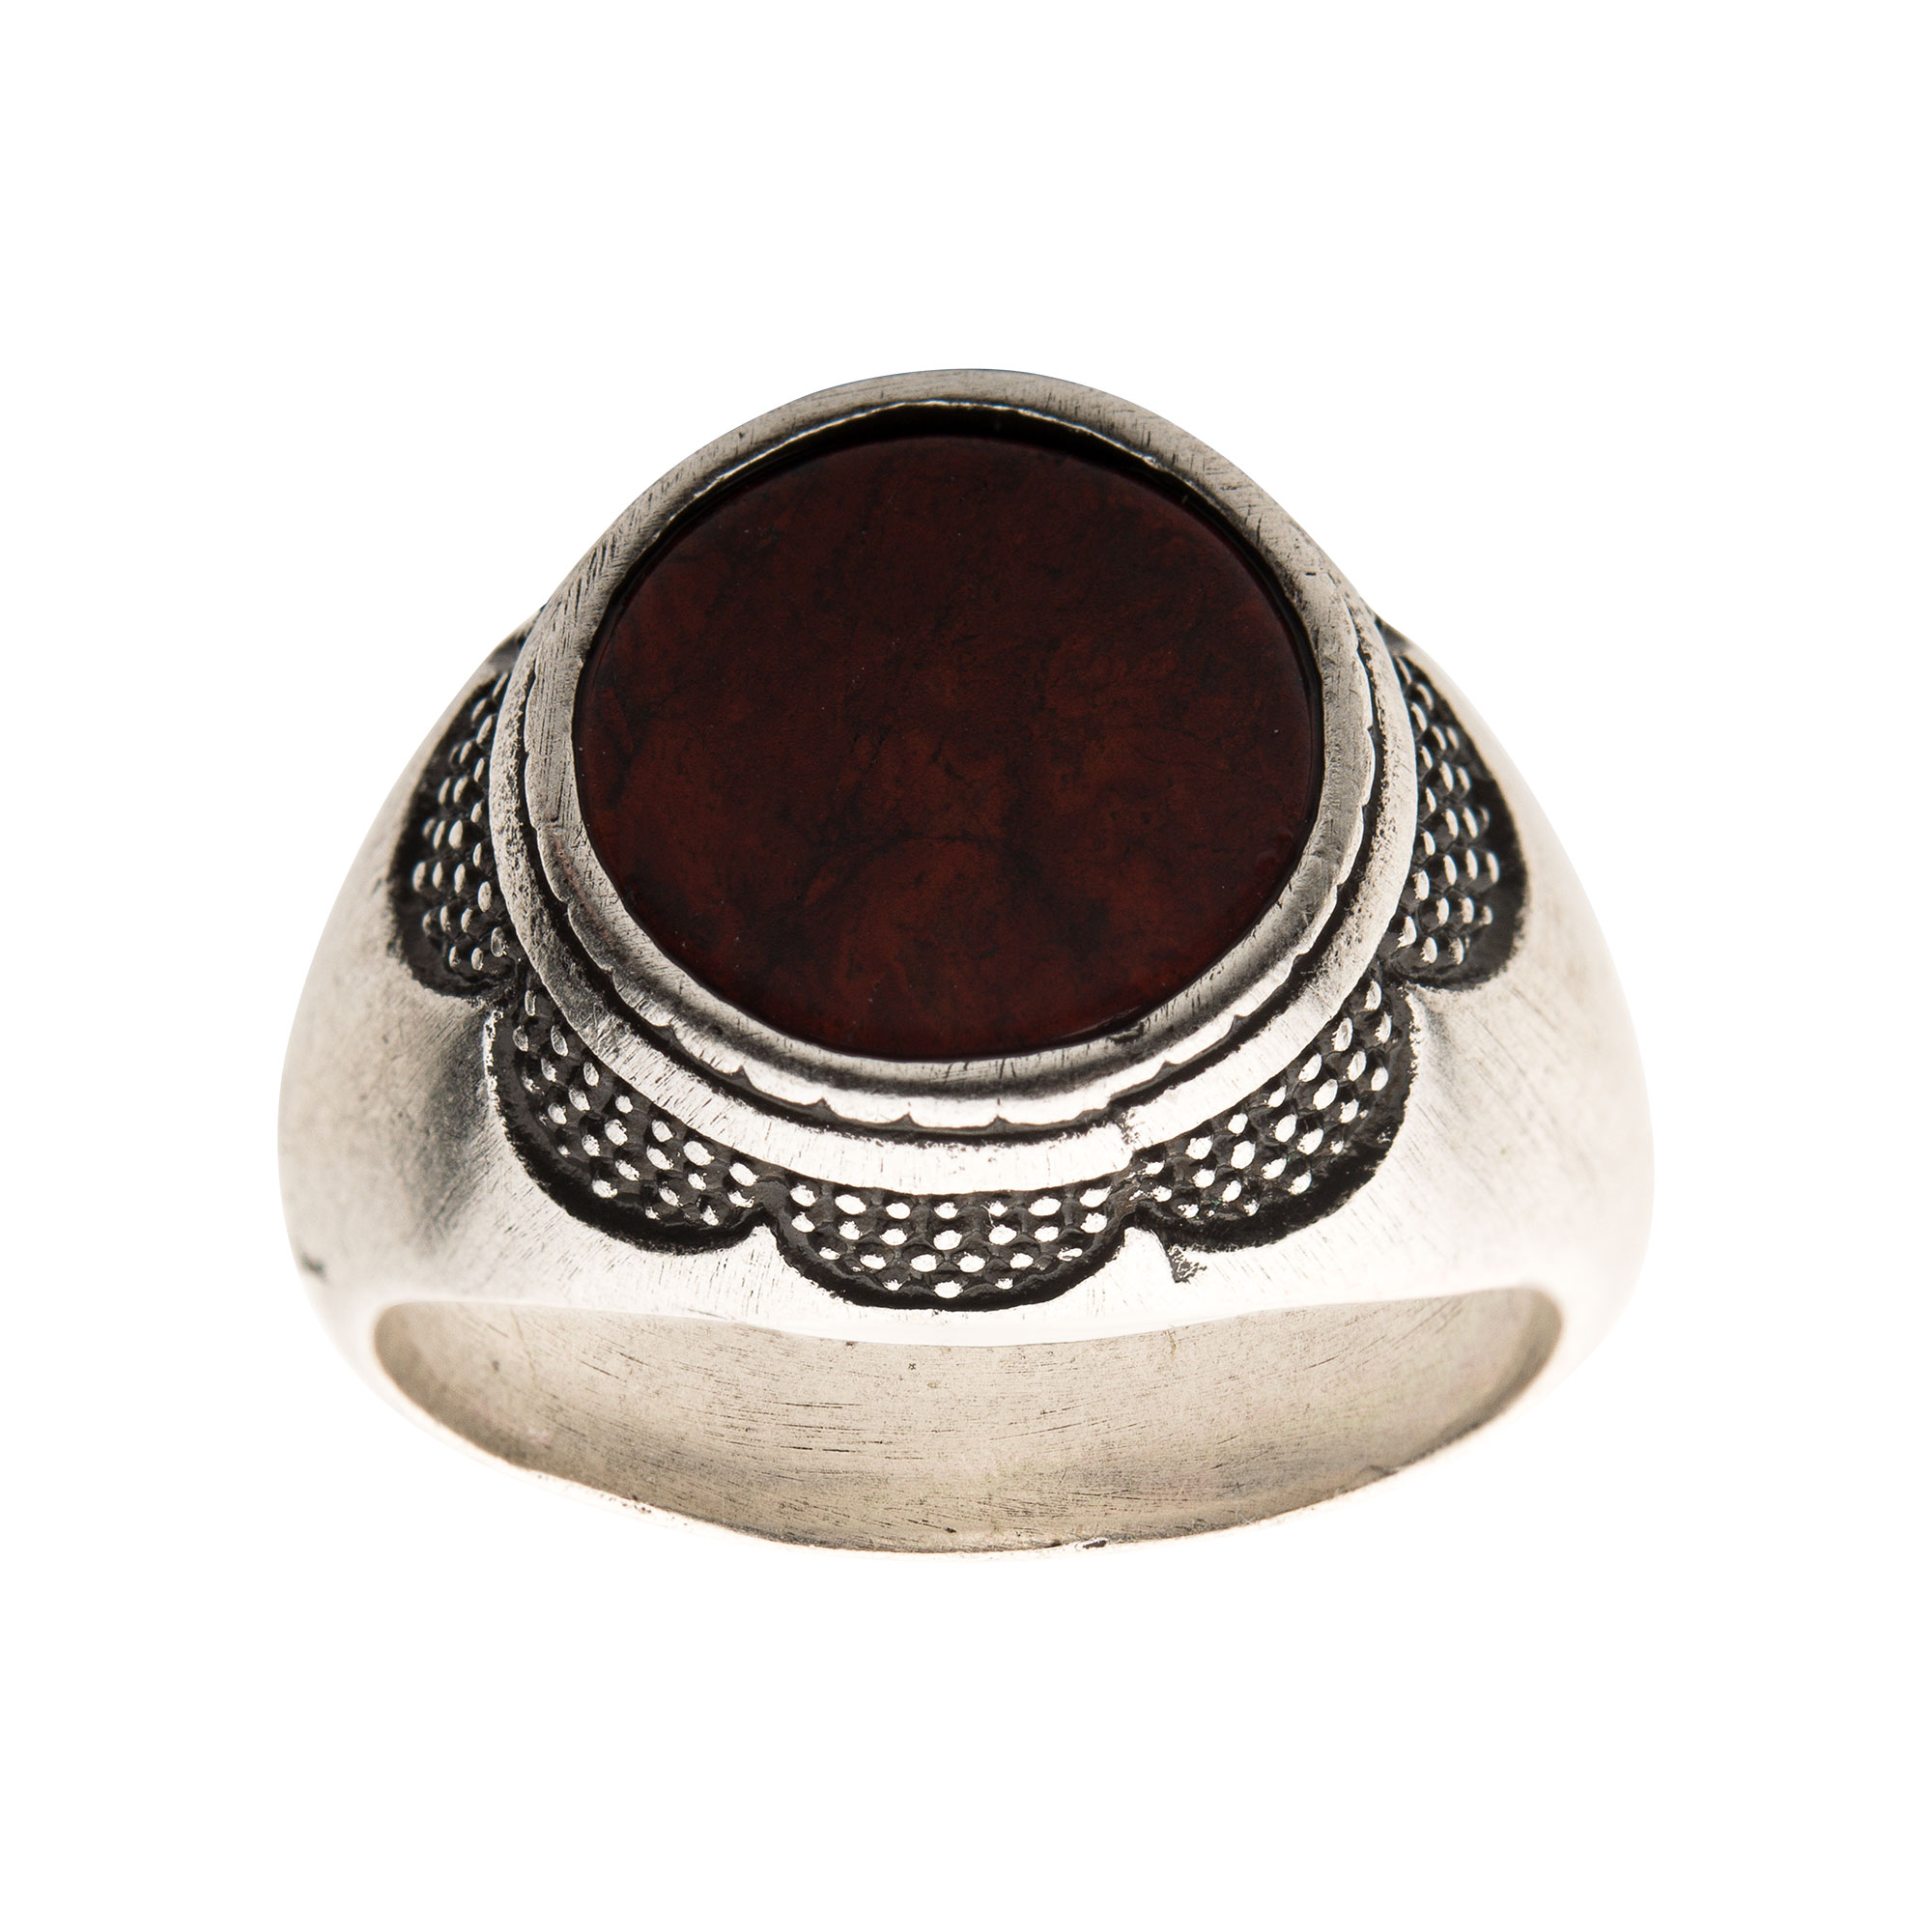 Stainless Steel Silver Plated with Red Jasper Stone Ring Image 2 Selman's Jewelers-Gemologist McComb, MS